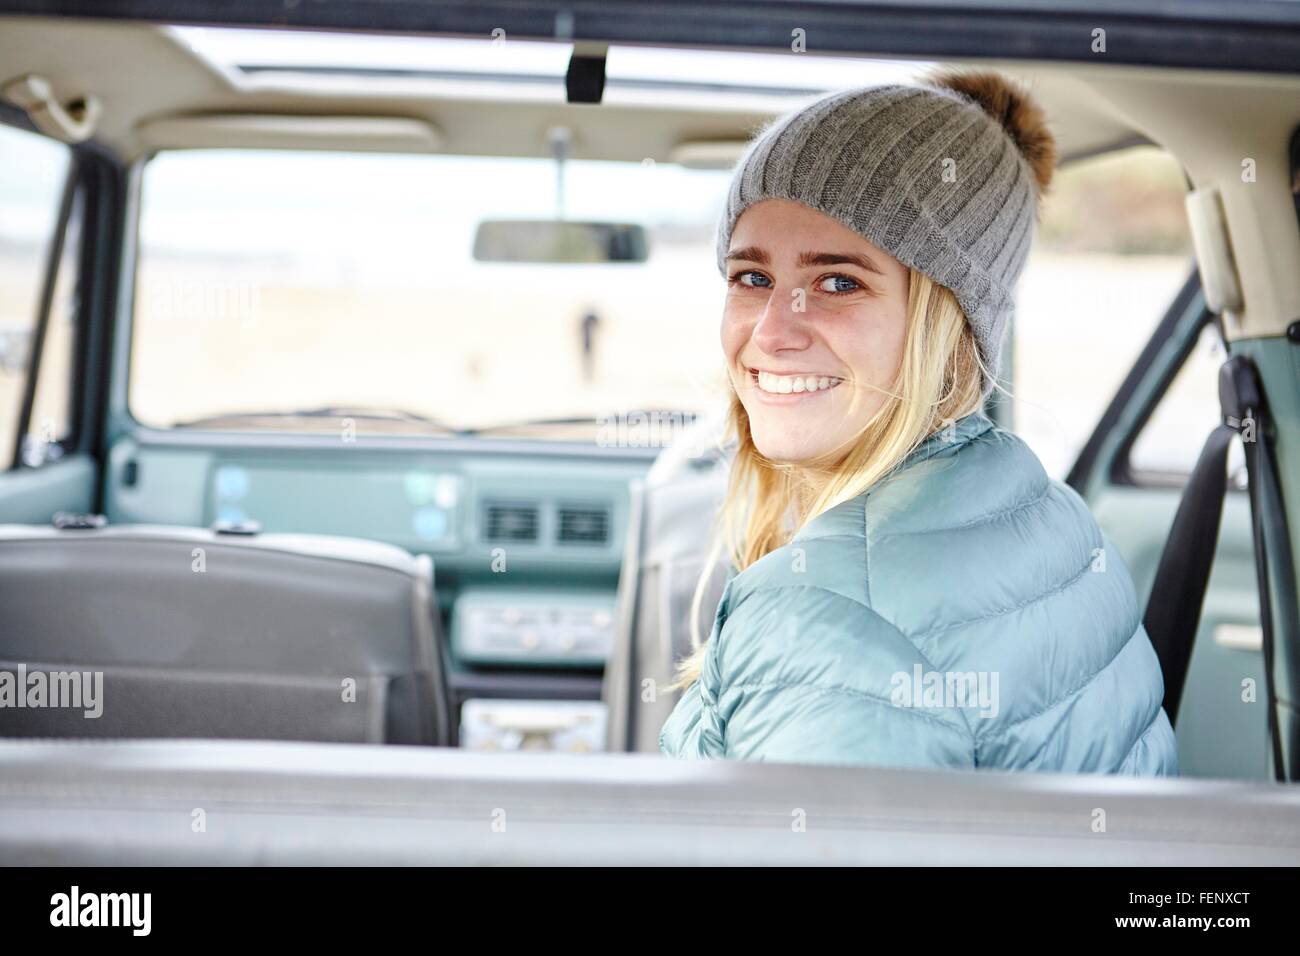 Portrait of young woman in car at beach wearing knit hat Stock Photo